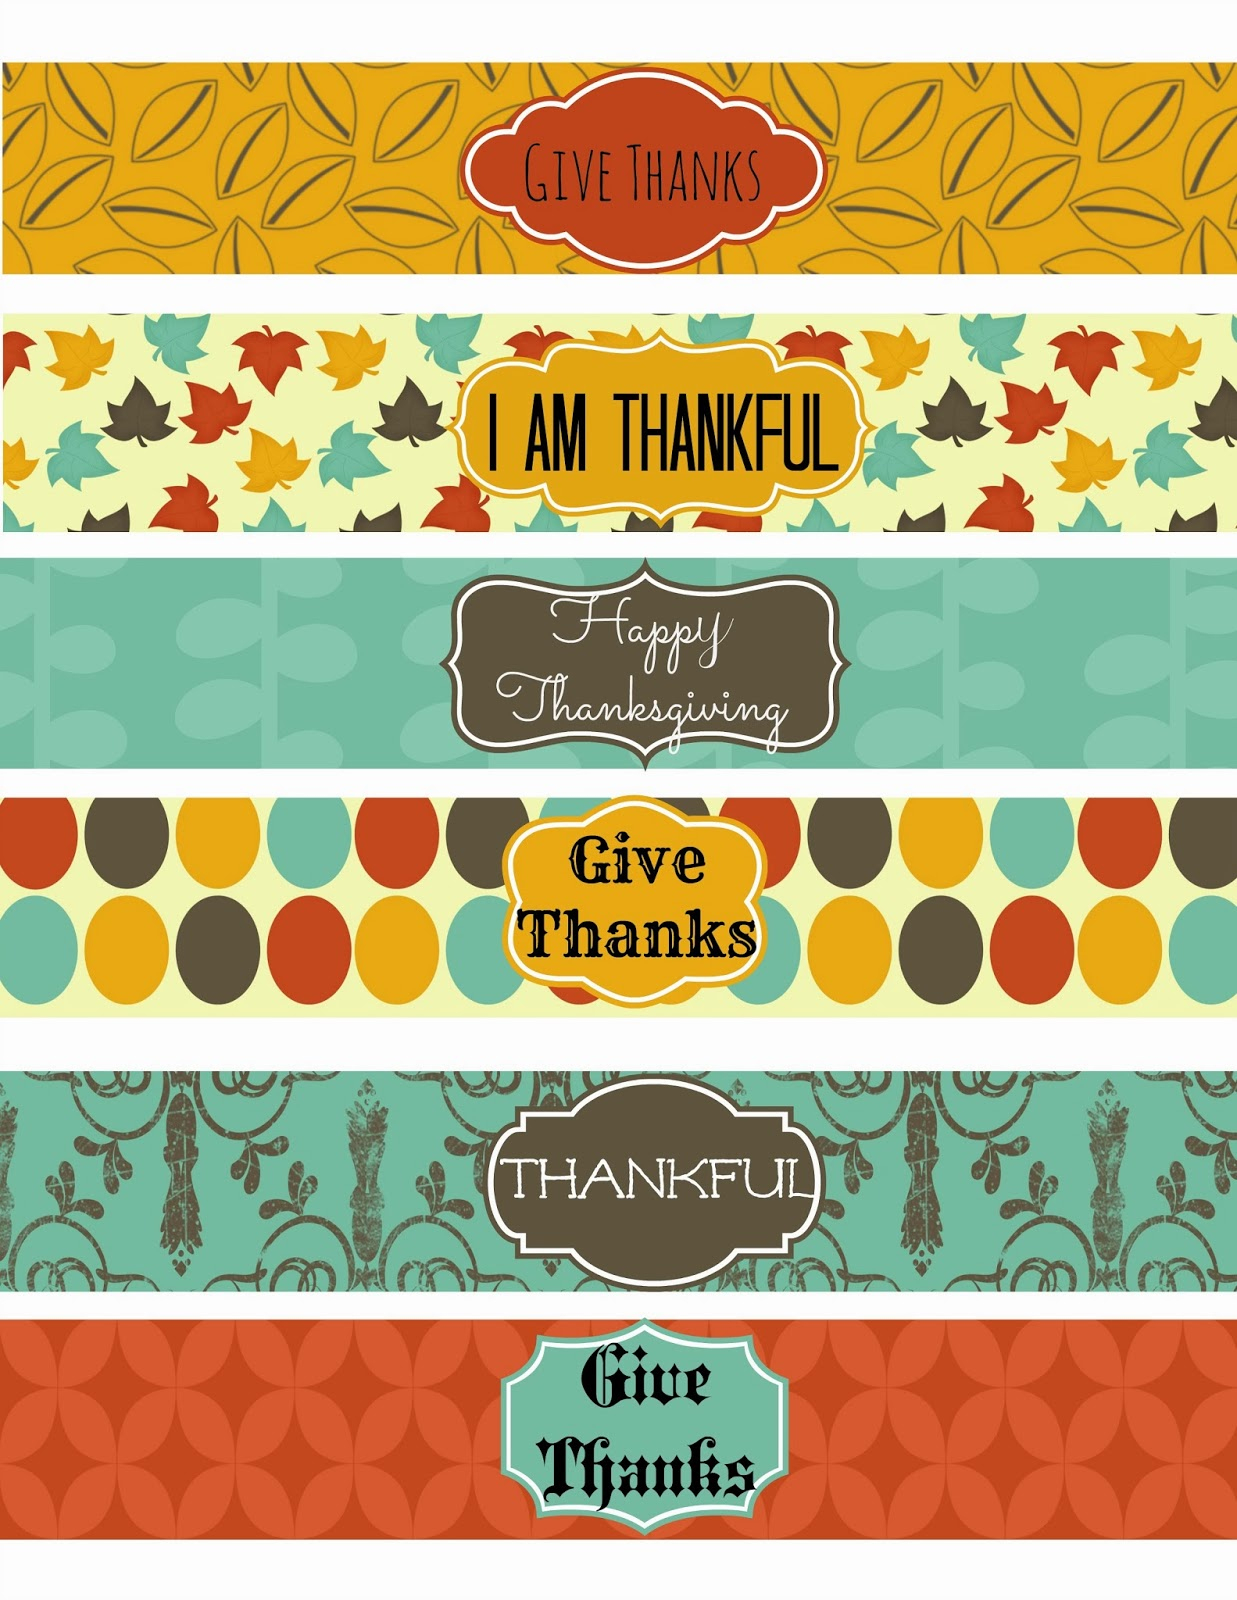 Second Chance To Dream - Free Thanksgiving Party Printables Set 1 - Free Printable Thanksgiving Images